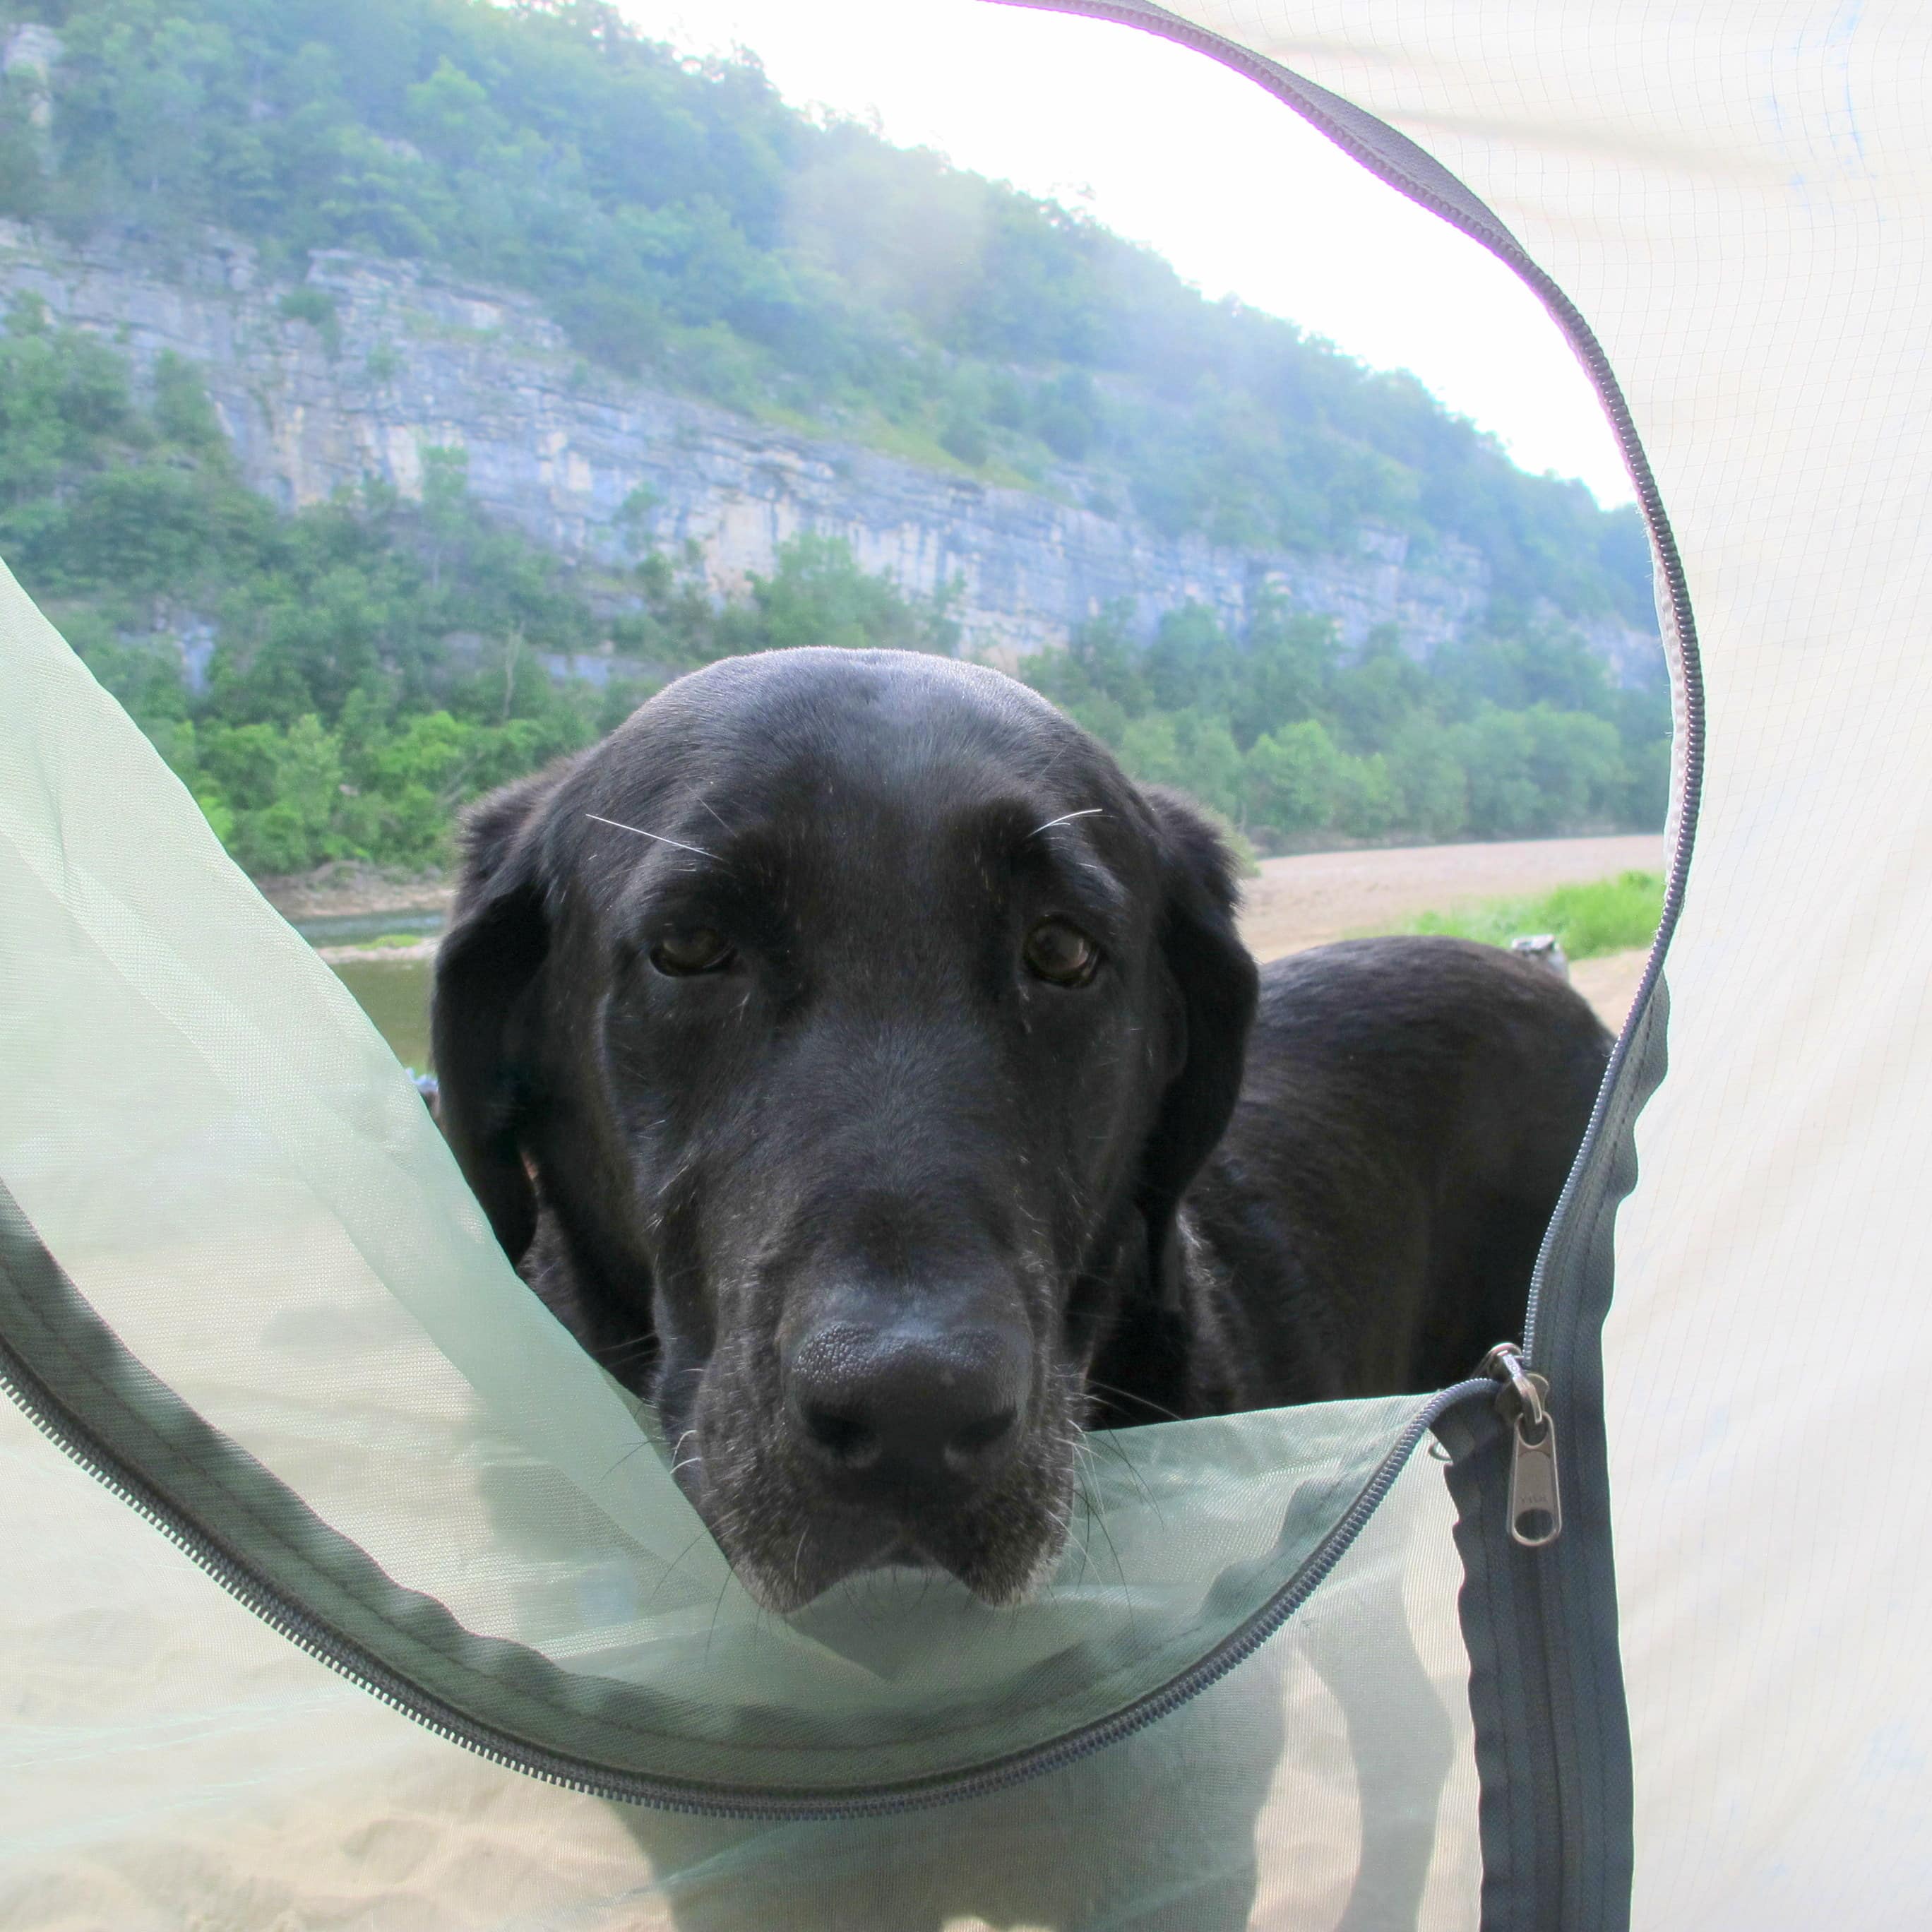 Dog peaking into tent